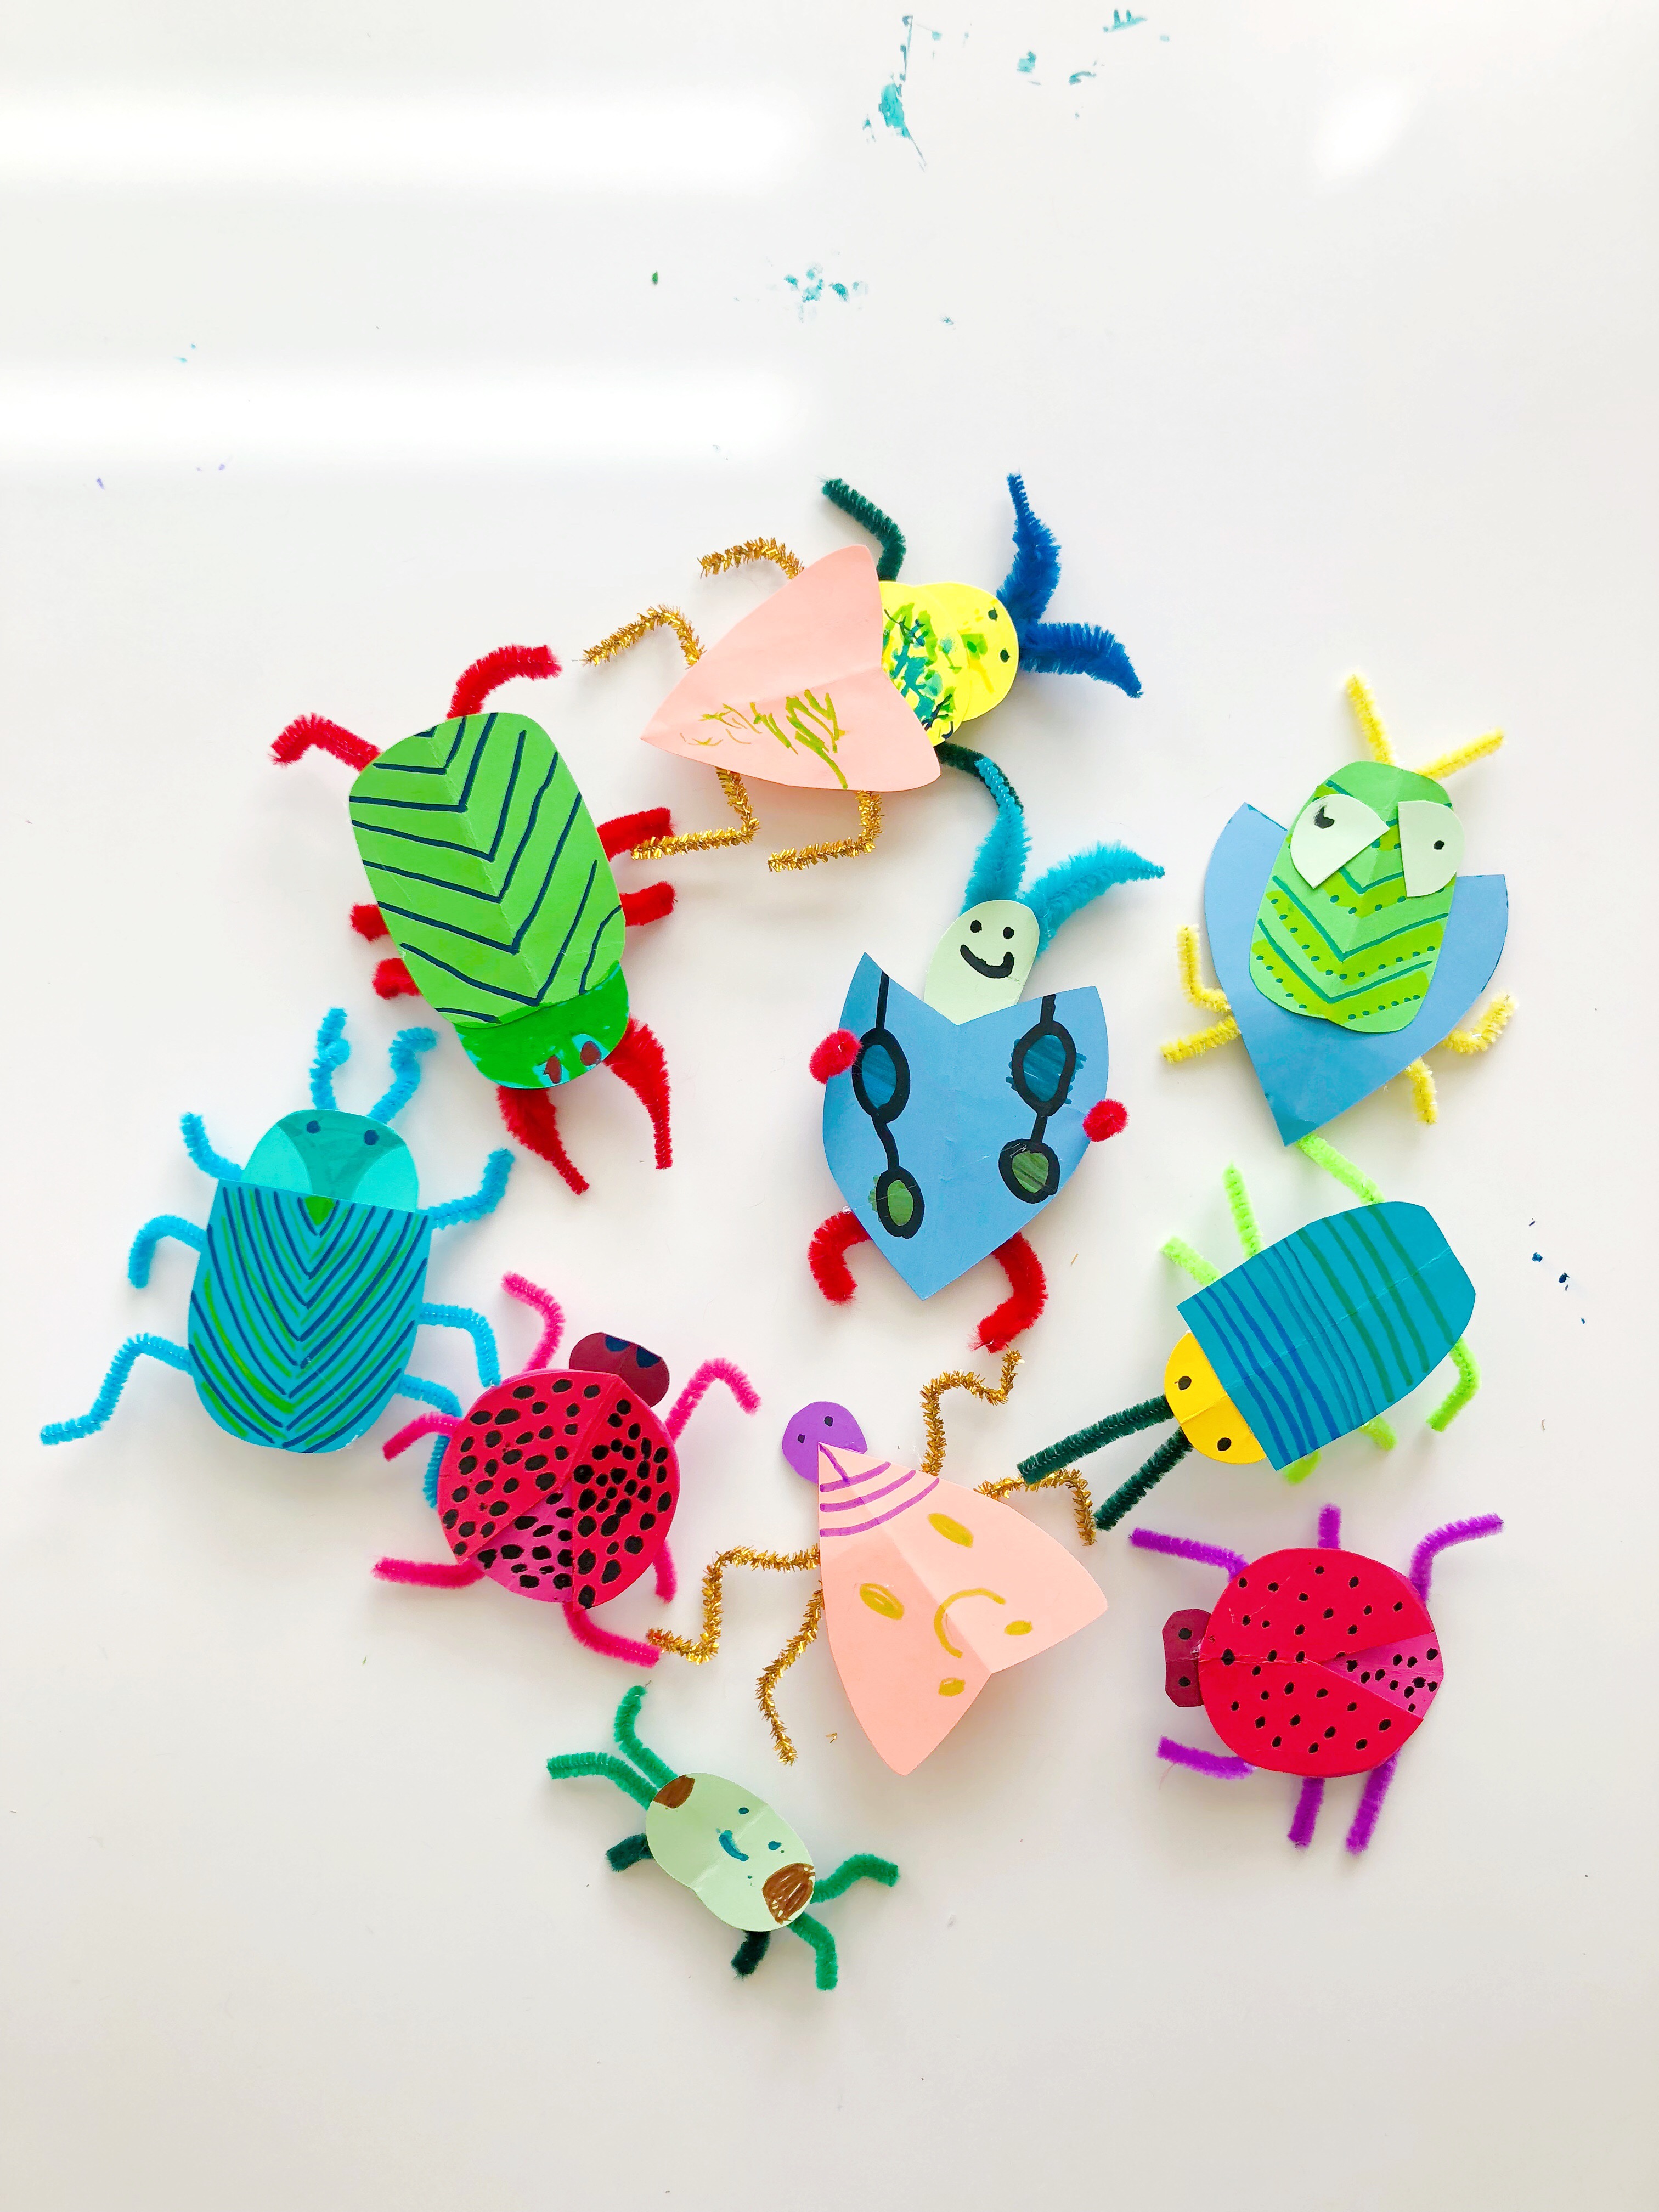 These cute DIY paper bugs are so much fun and a great craft with your kids.